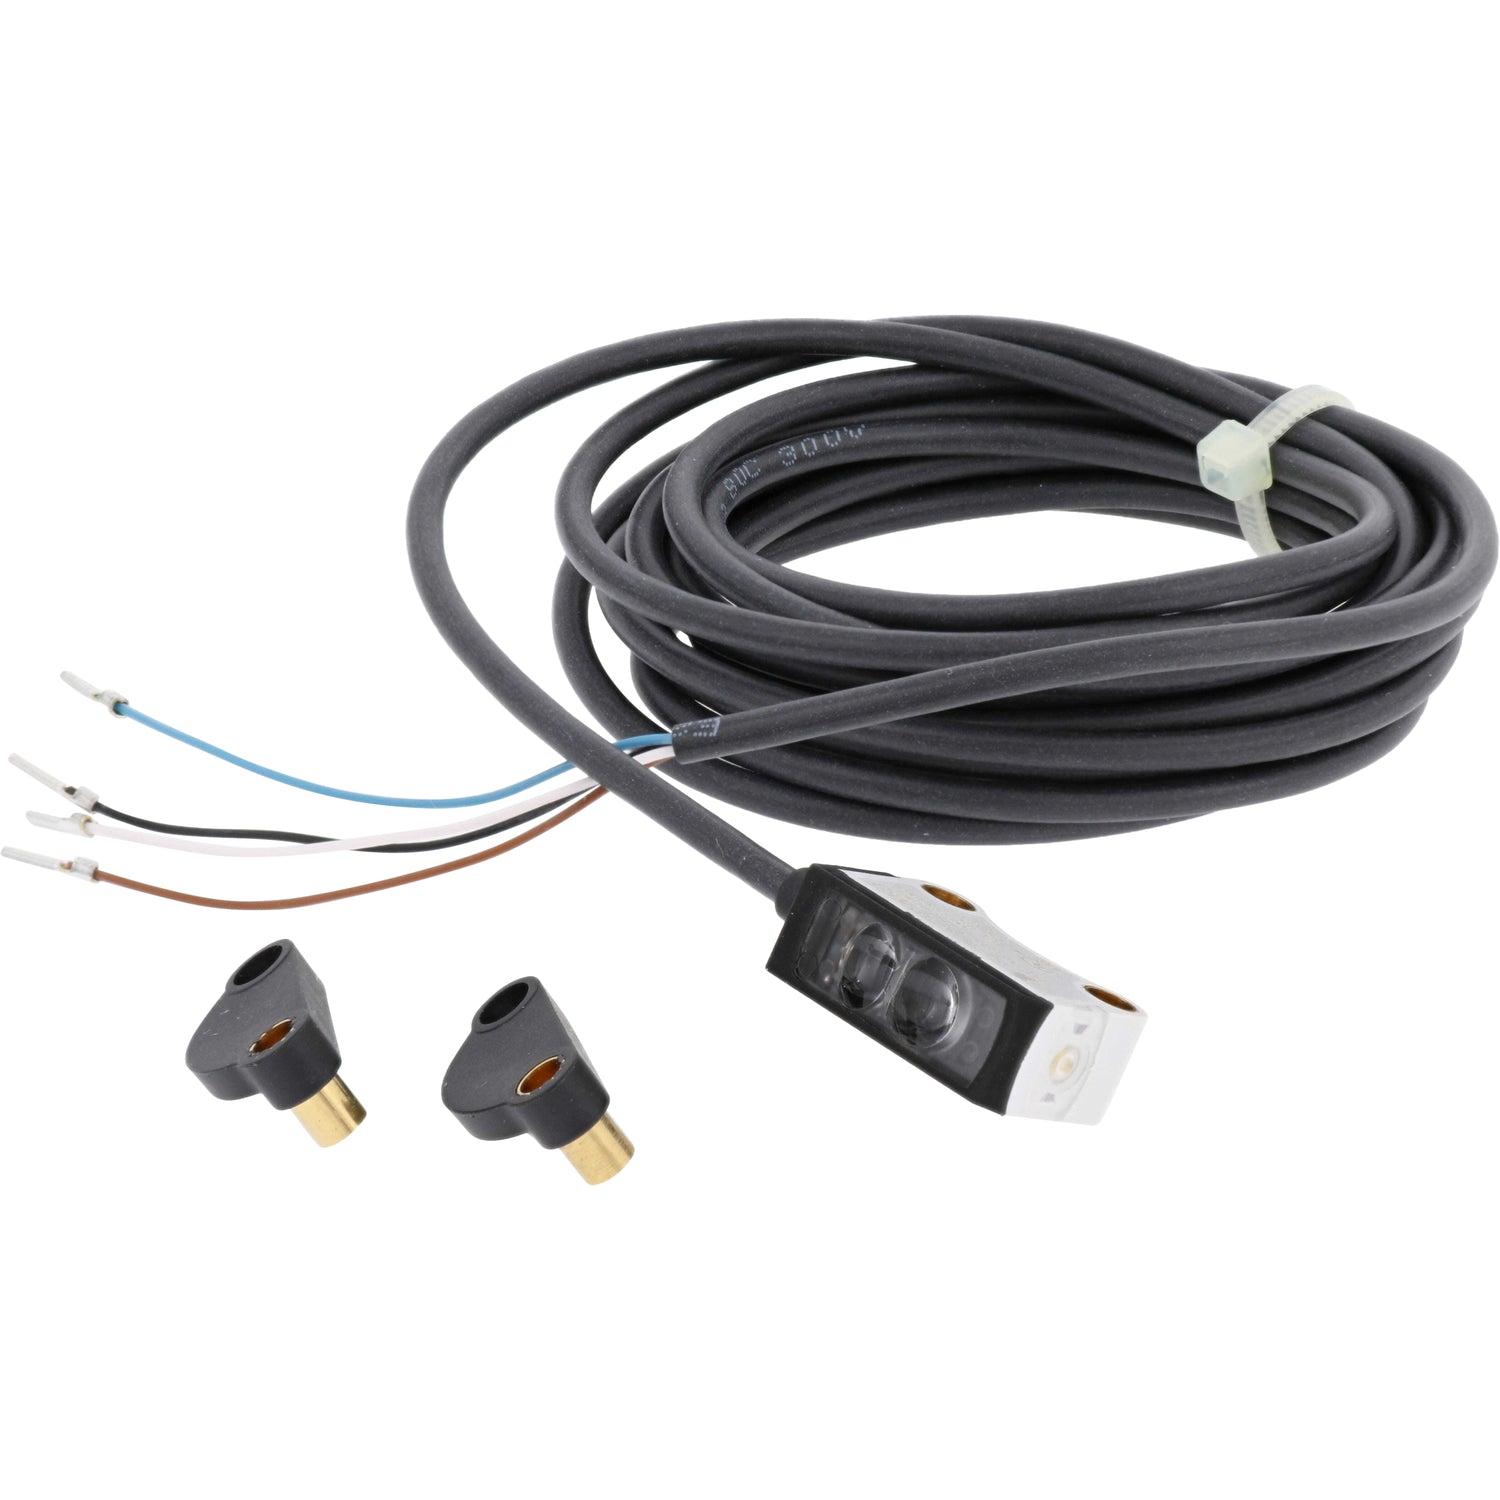 Coiled black sensor cable with black and white photo sensor on one end and four exposed wires (blue, black, white, brown) on the other end. Two mounting brackets are placed nearby. Parts shown on white background. 